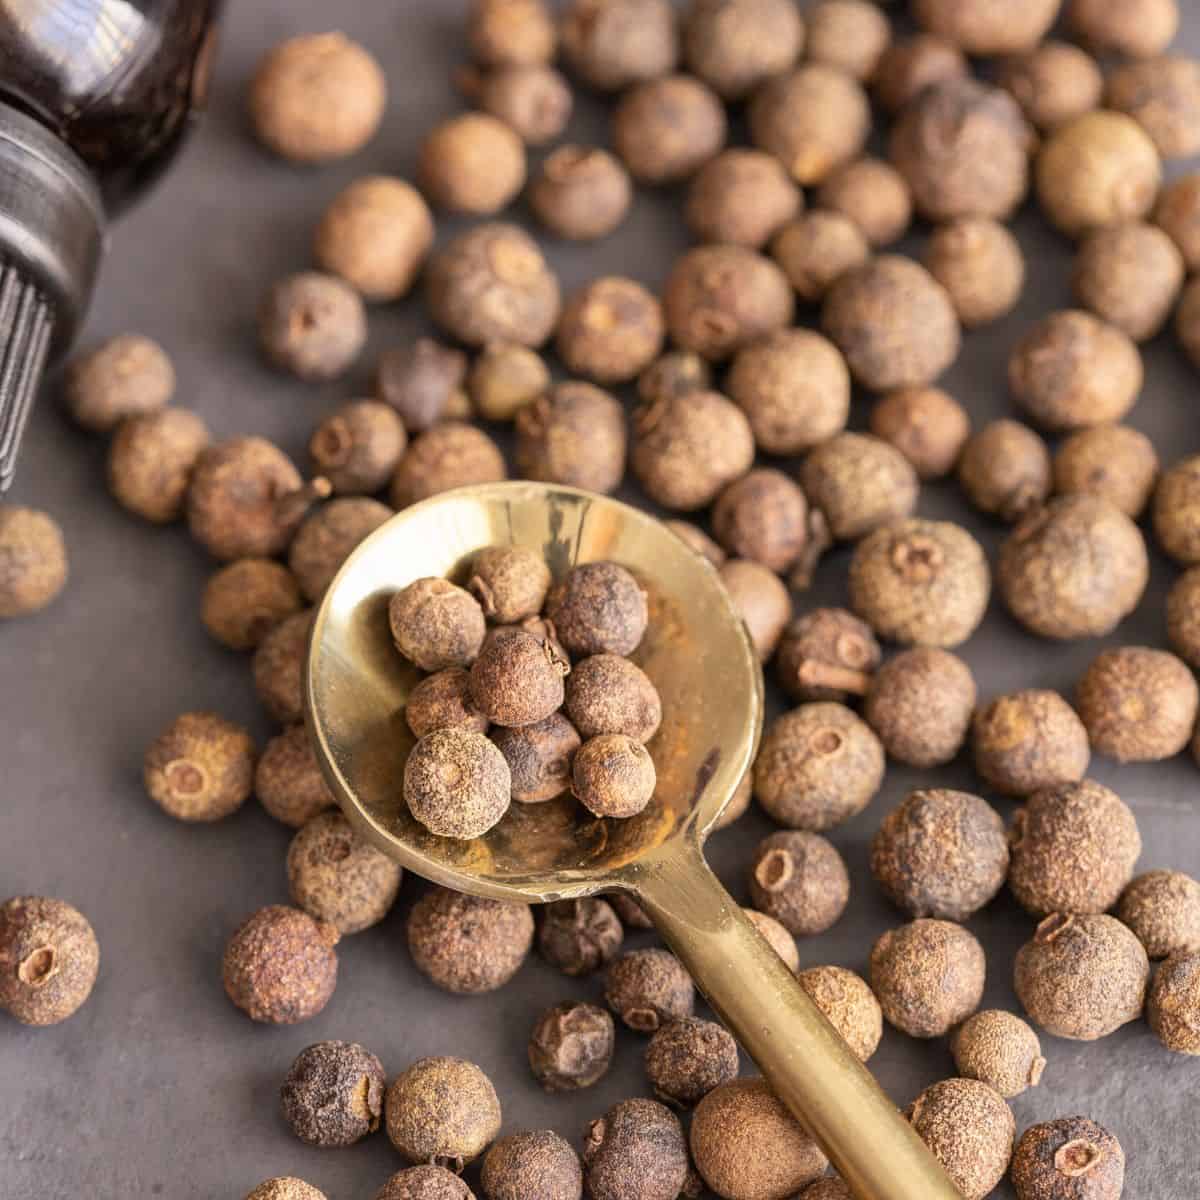 Need Substitutes For Allspice? Here Are The 7 Best Options